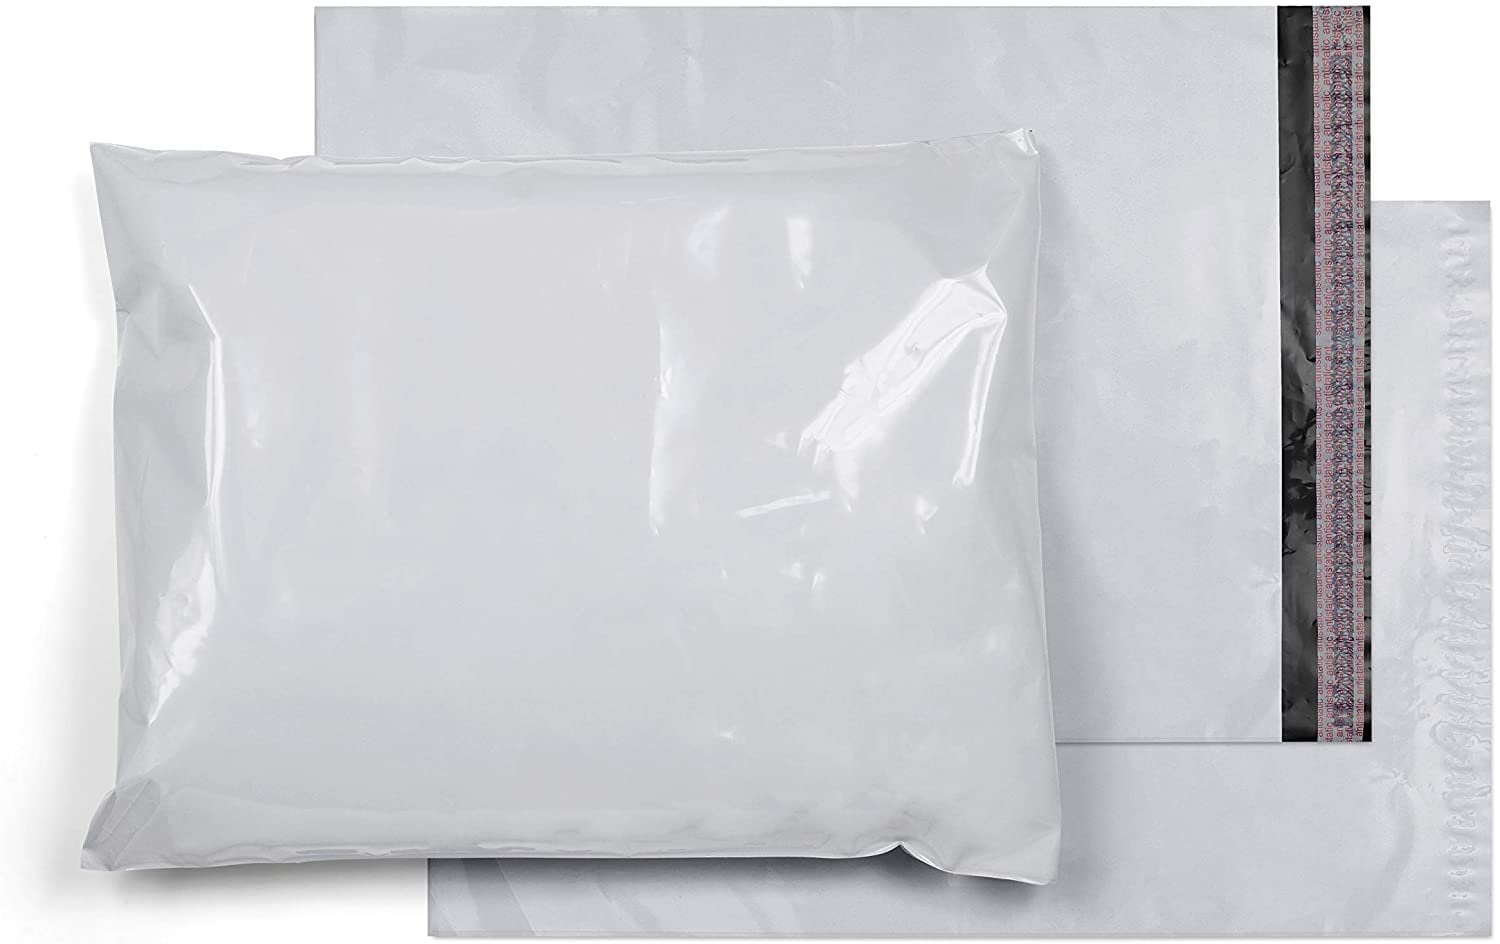 500 7.5x10.5 Poly Bags Plastic Envelopes Mailers Shipping Self Seal 7.5"x10.5" 